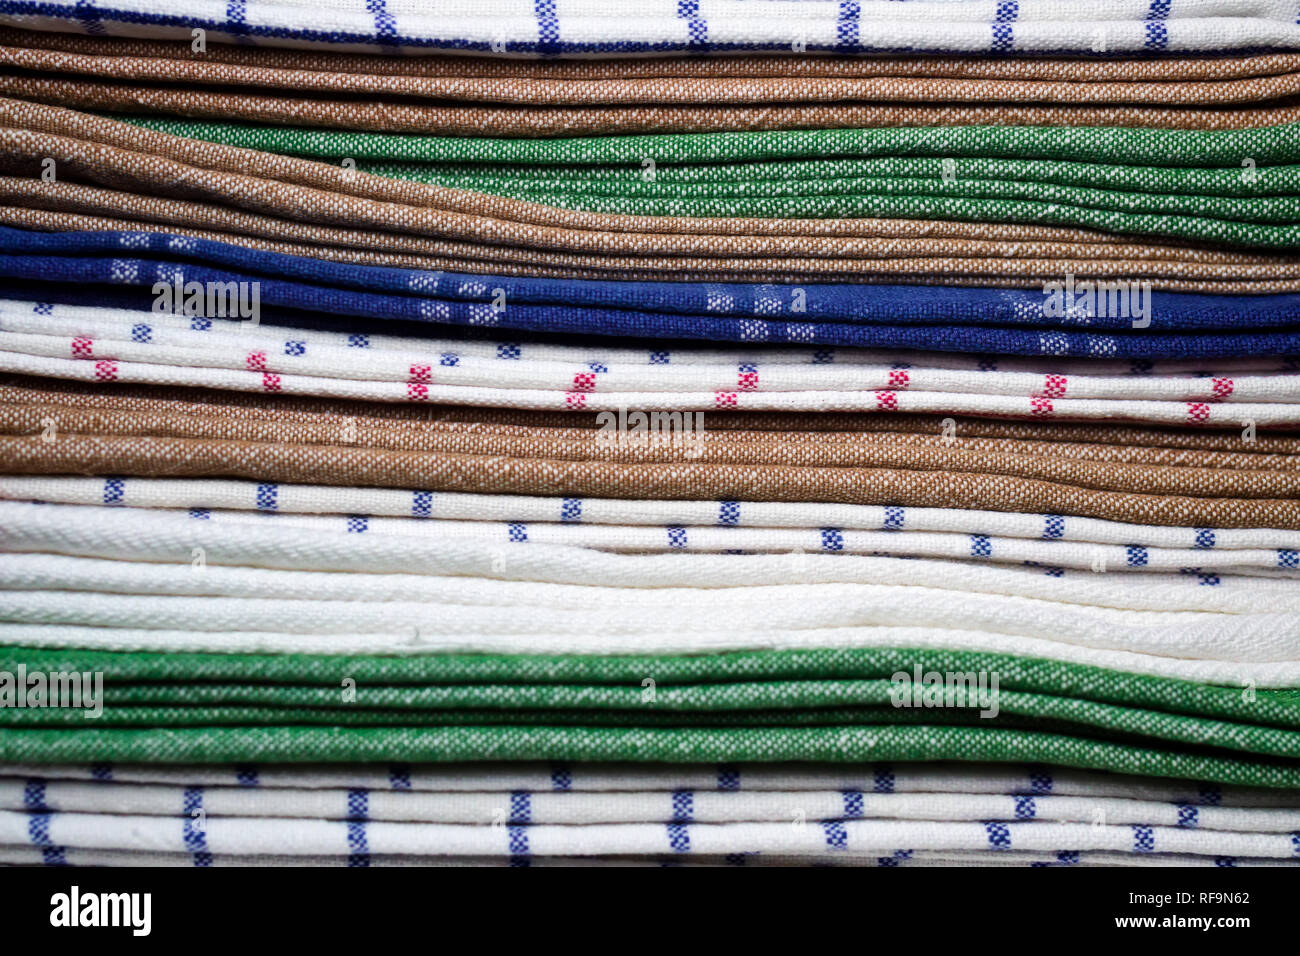 stack of mixed cotton kitchen towels Stock Photo